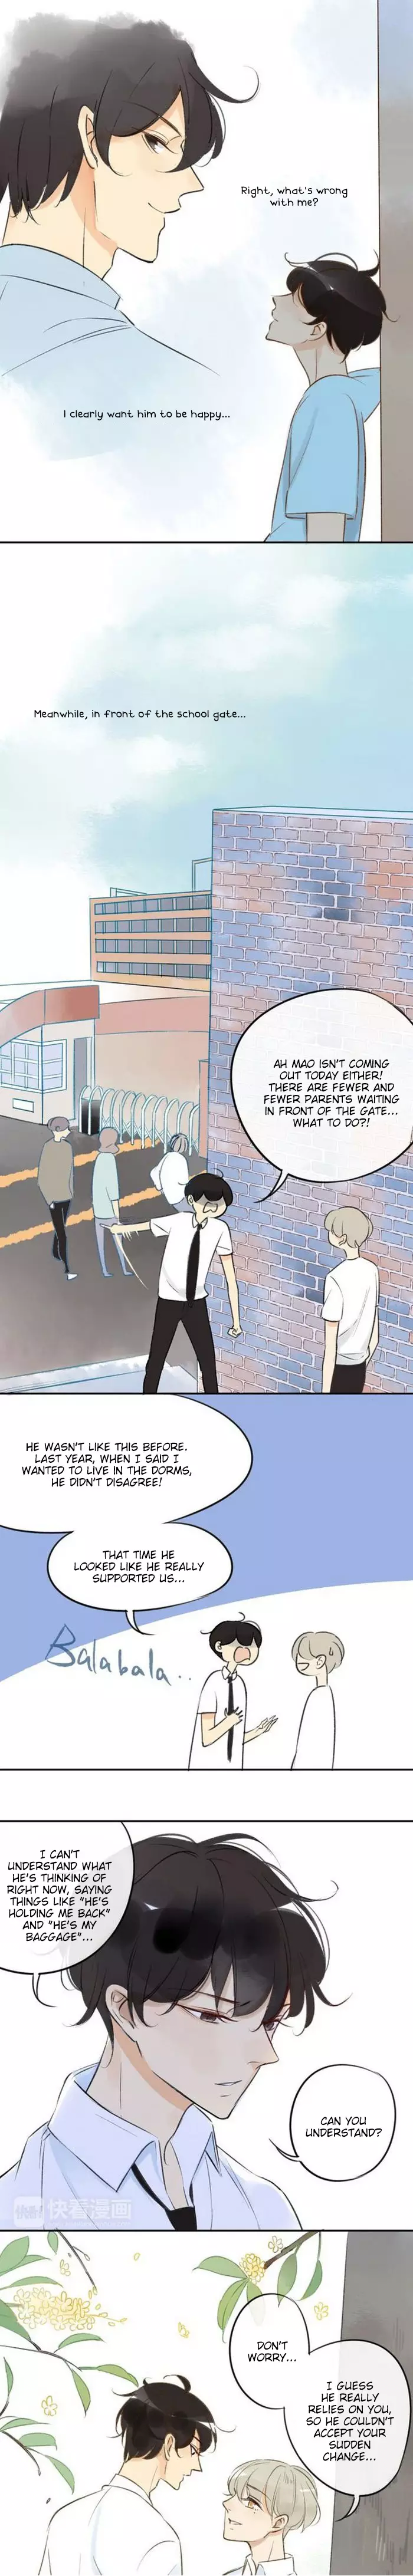 Classmate Relationship? - 83 page 9-0398b92a